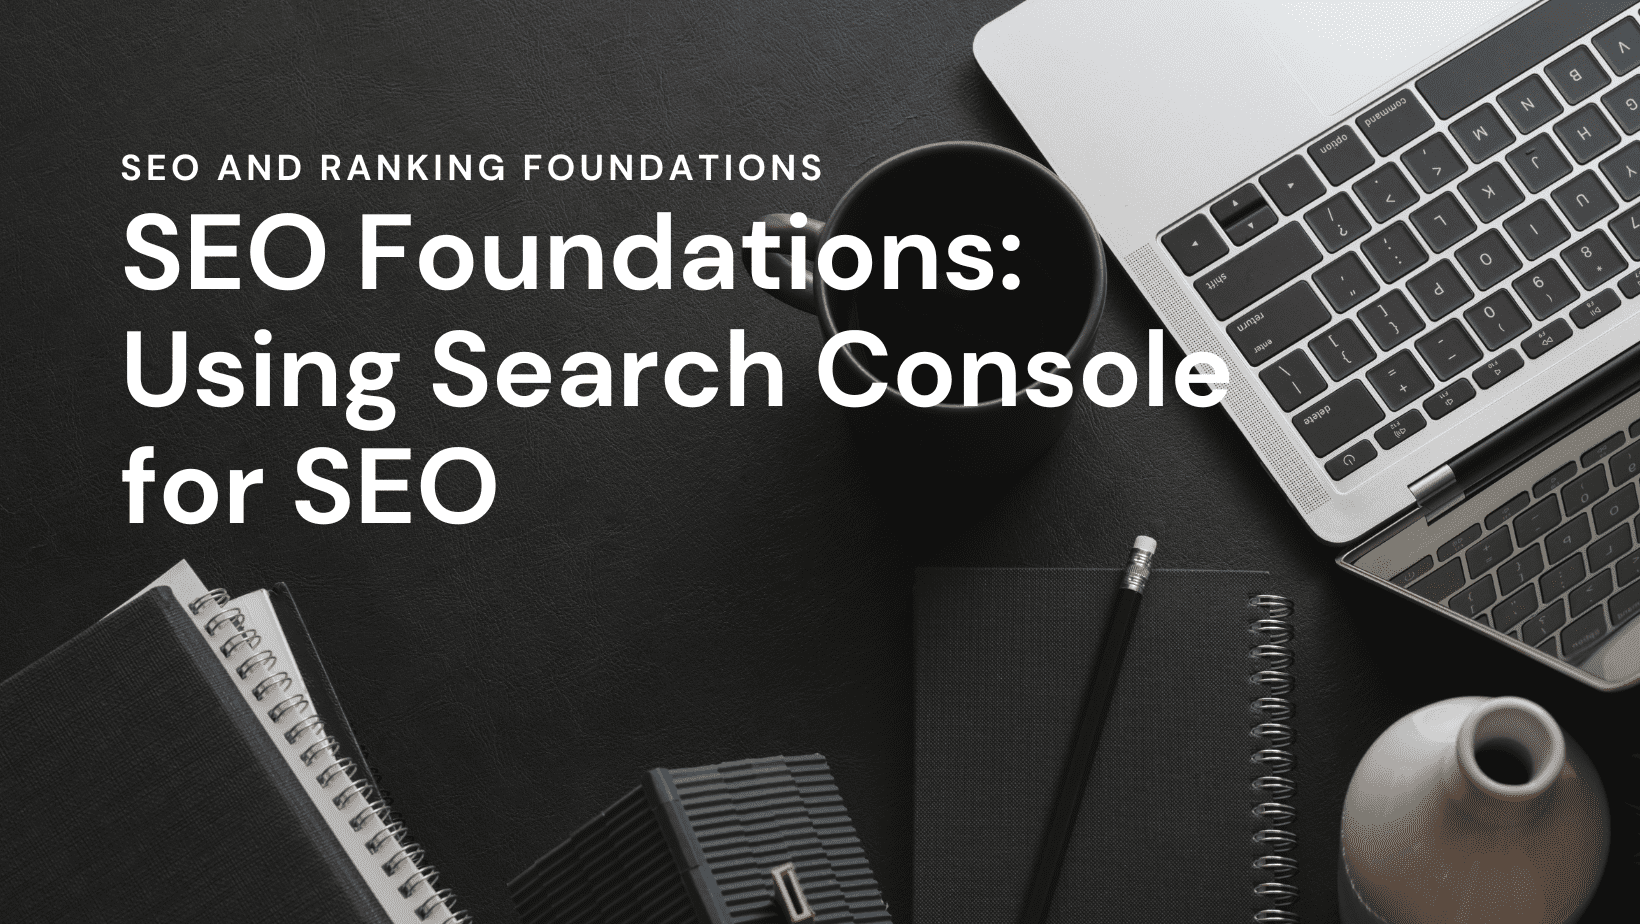 SEO and Ranking Foundations SEO Foundations: Using Search Console for SEO